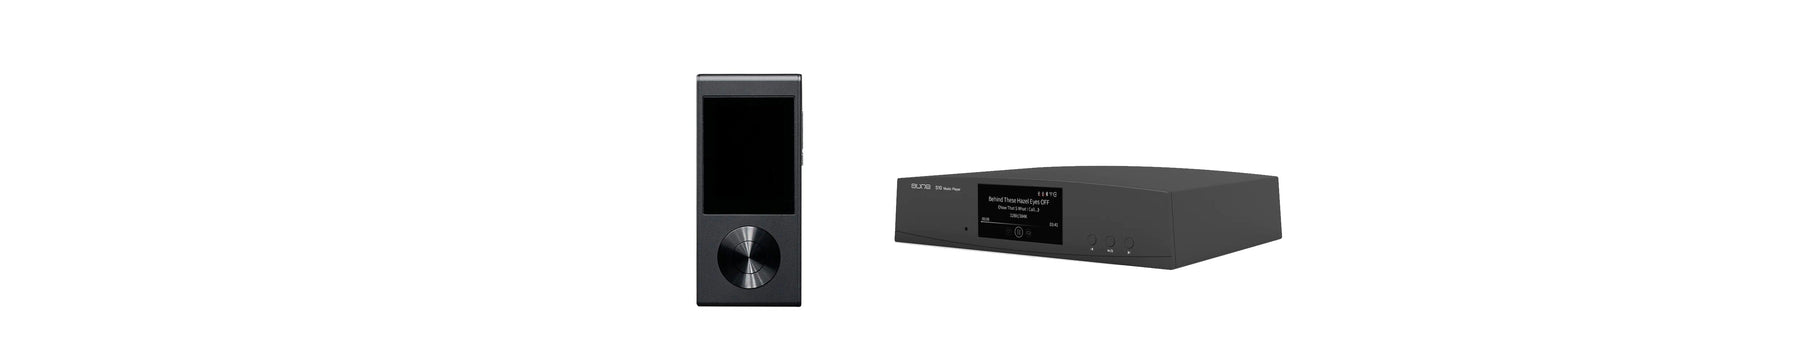 Aune Introduces M1p Audio Player & S10N High-Res Network Streamer Player